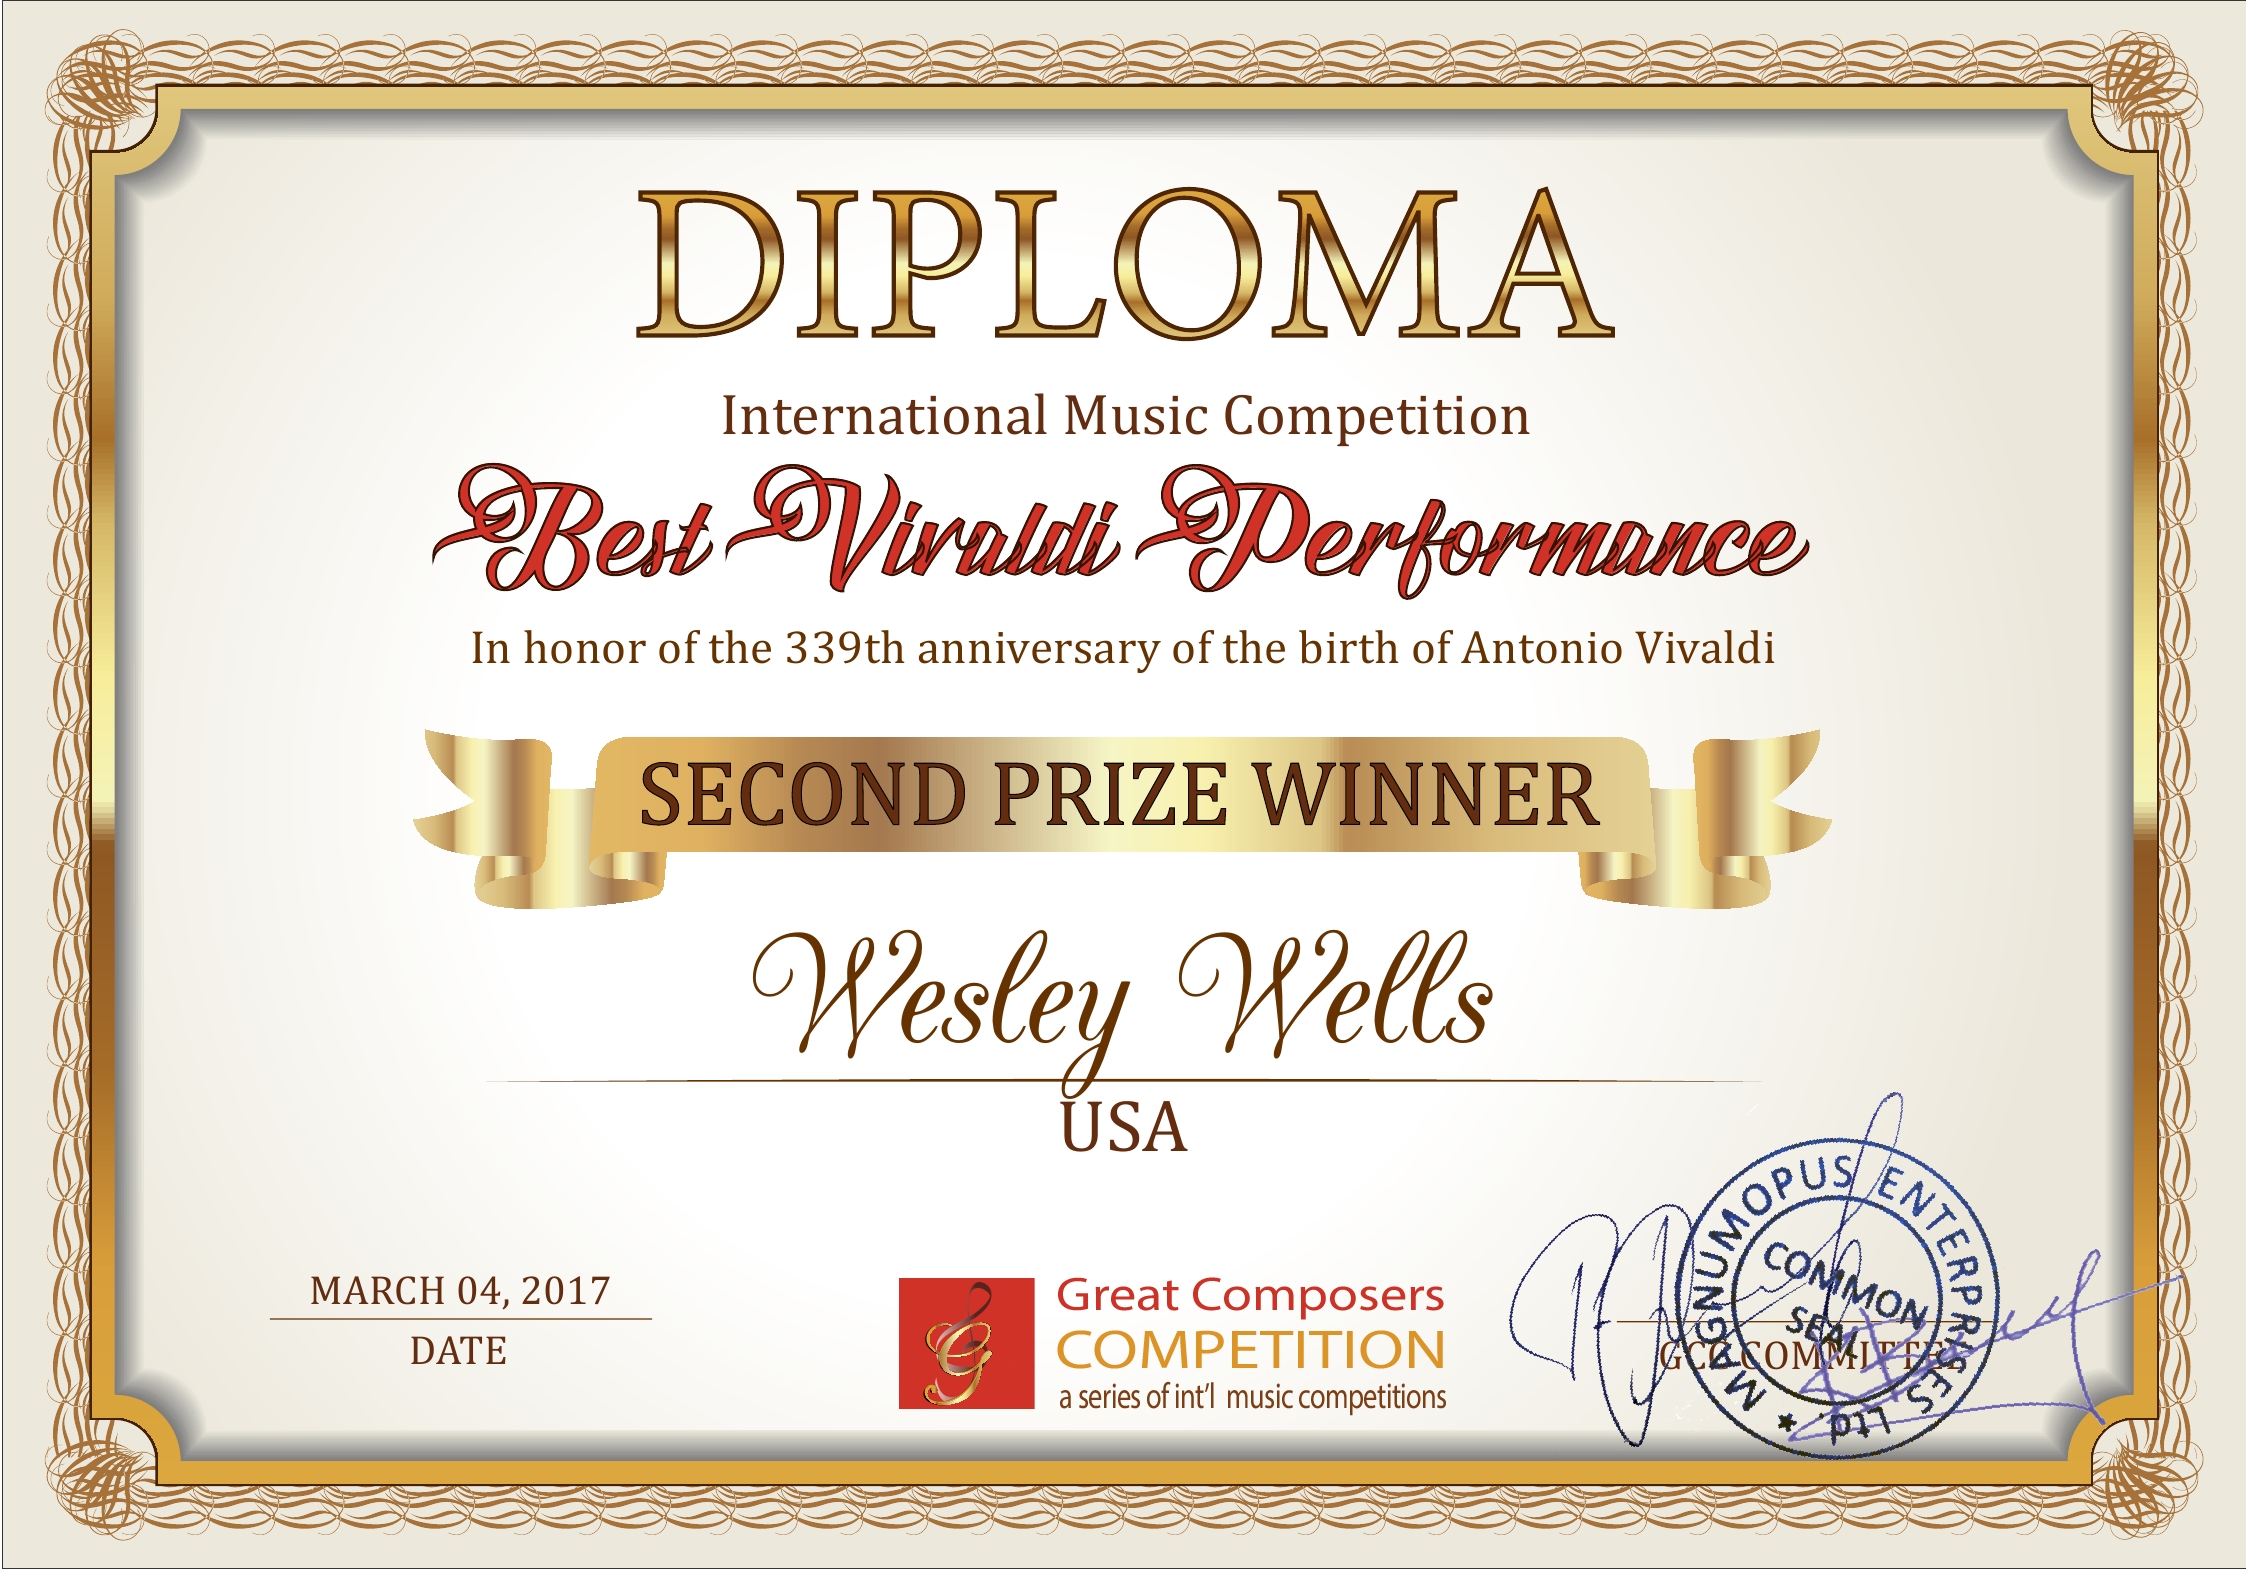 Wesley Wells 2nd place international violin competition